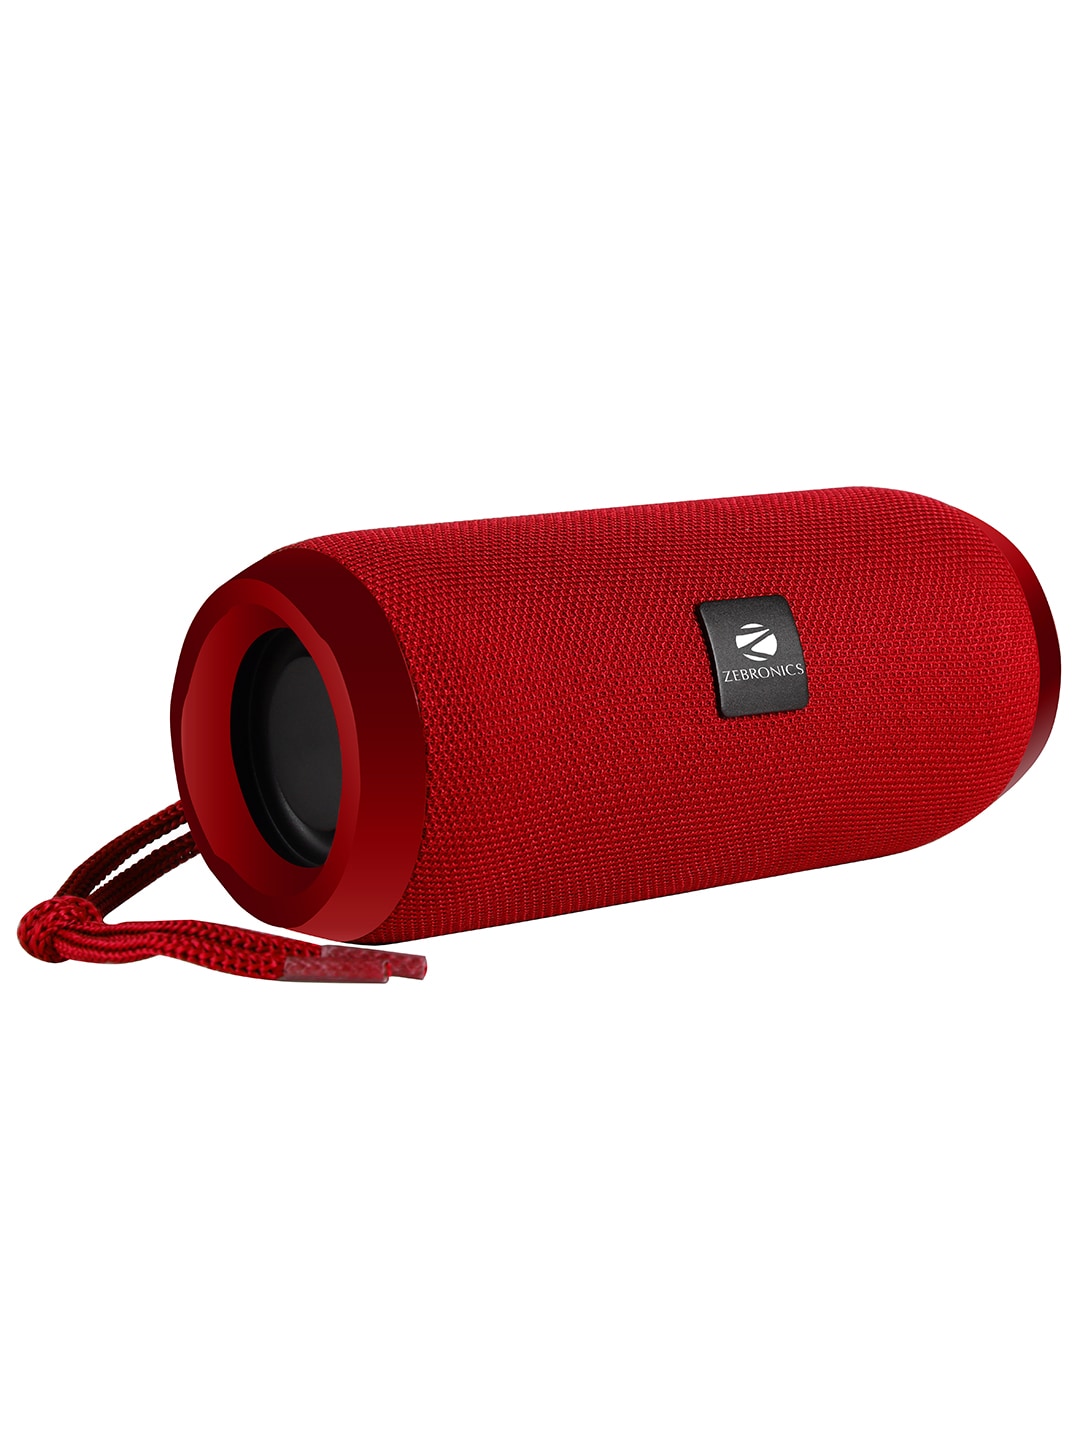 ZEBRONICS Zeb-Action Portable BT Speaker with TWS Function - Red Price in India